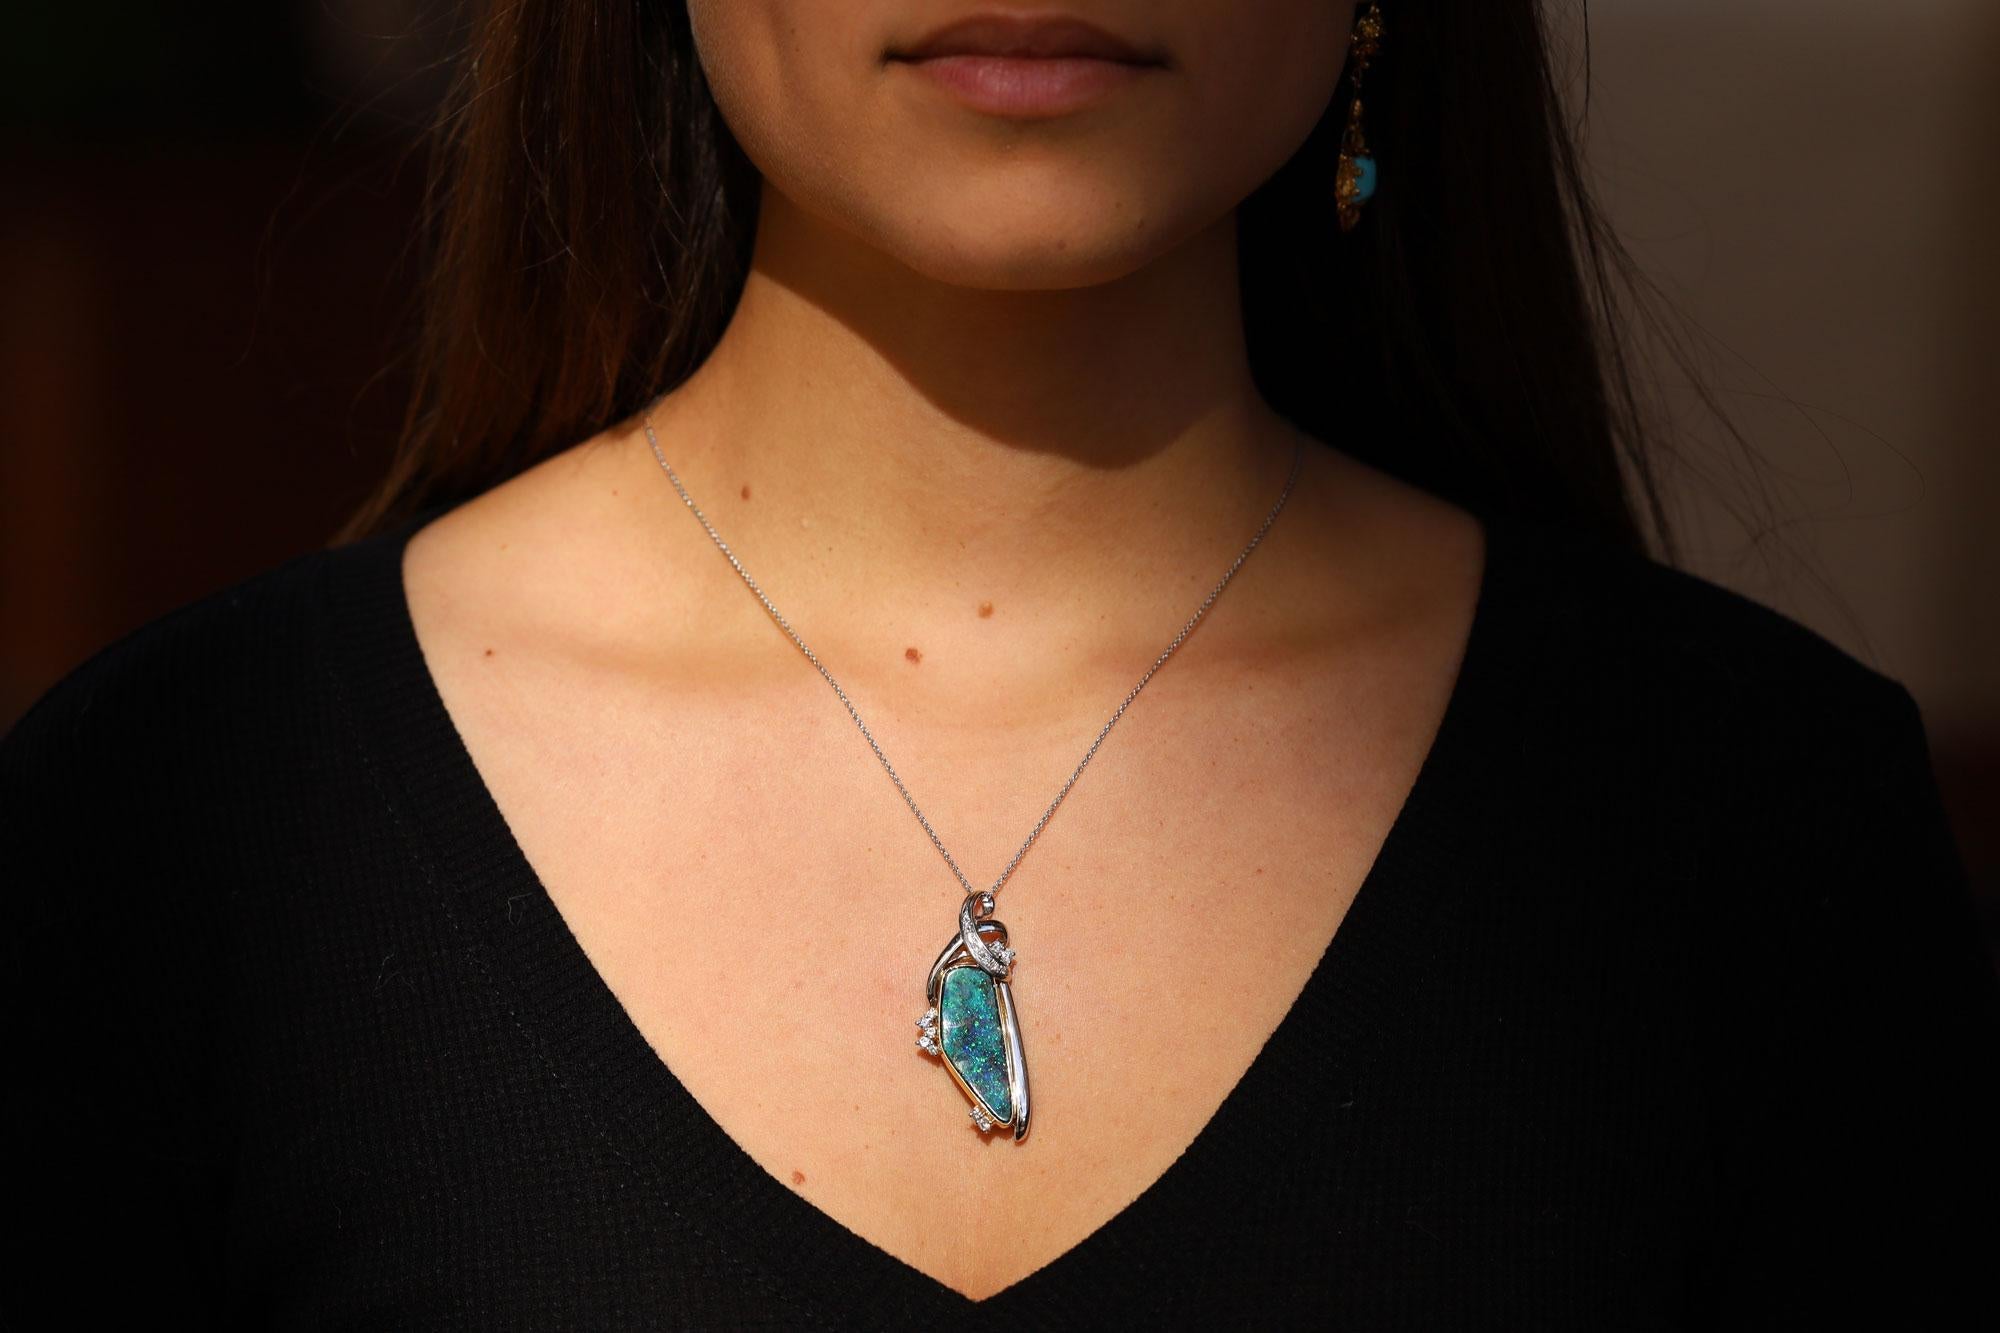 A fabulous vintage heirloom, this vivacious boulder opal pendant necklace is a statement of natural beauty. This impressive 10.74 carat gemstone is carved in a freeform, following the contours of the rough gem and showcased in yellow gold, platinum